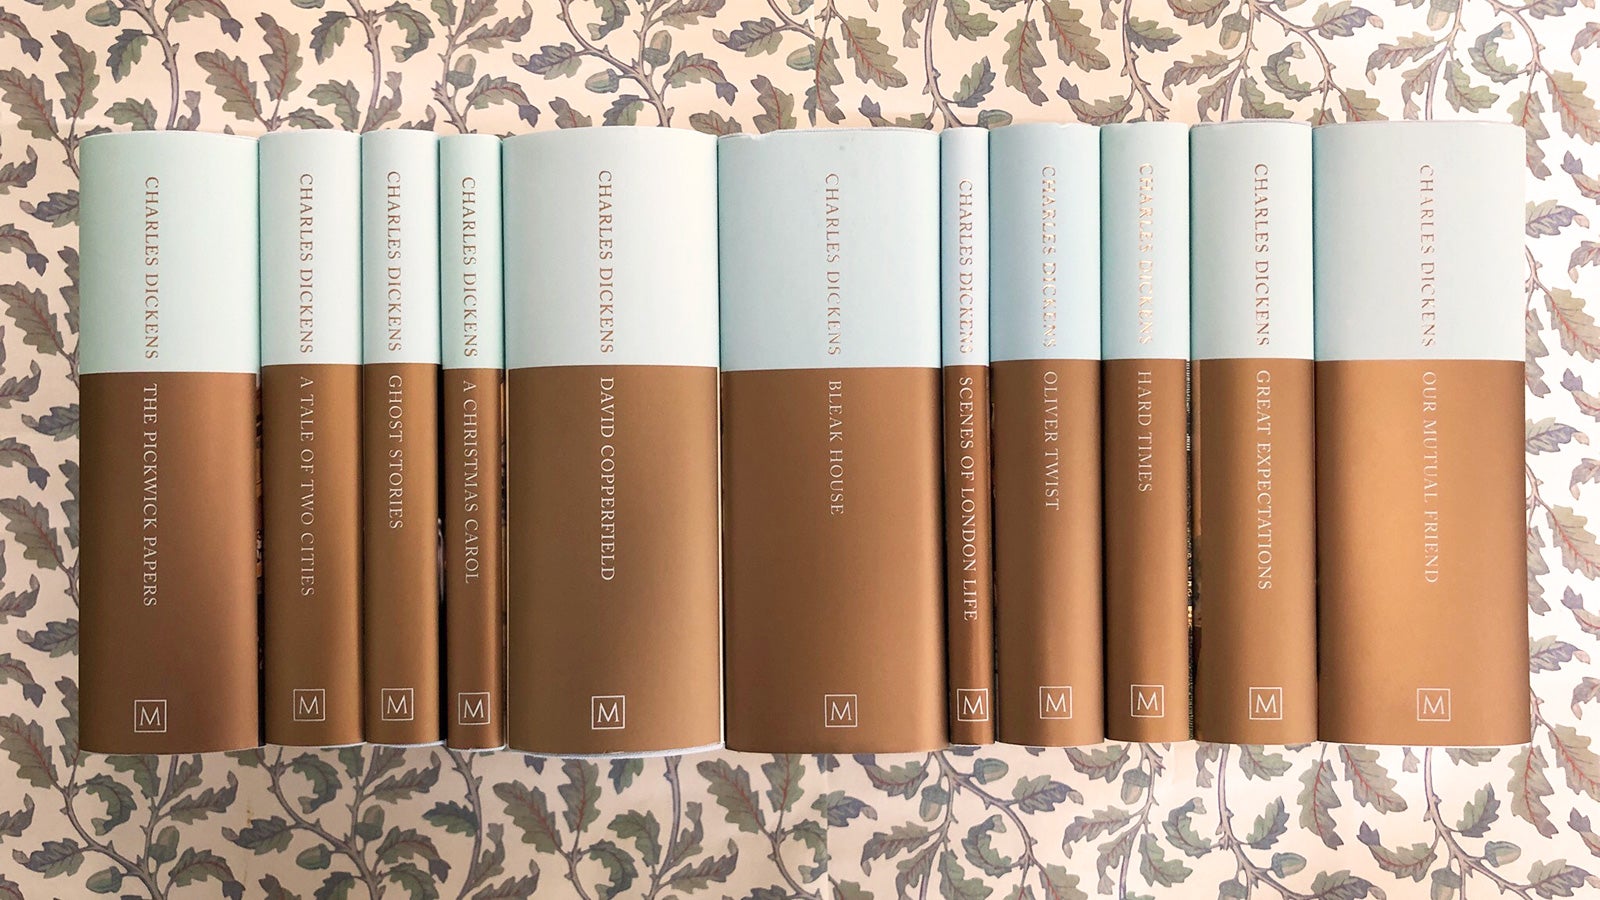 The collection of Charles Dickens MCL titles with their spines up.